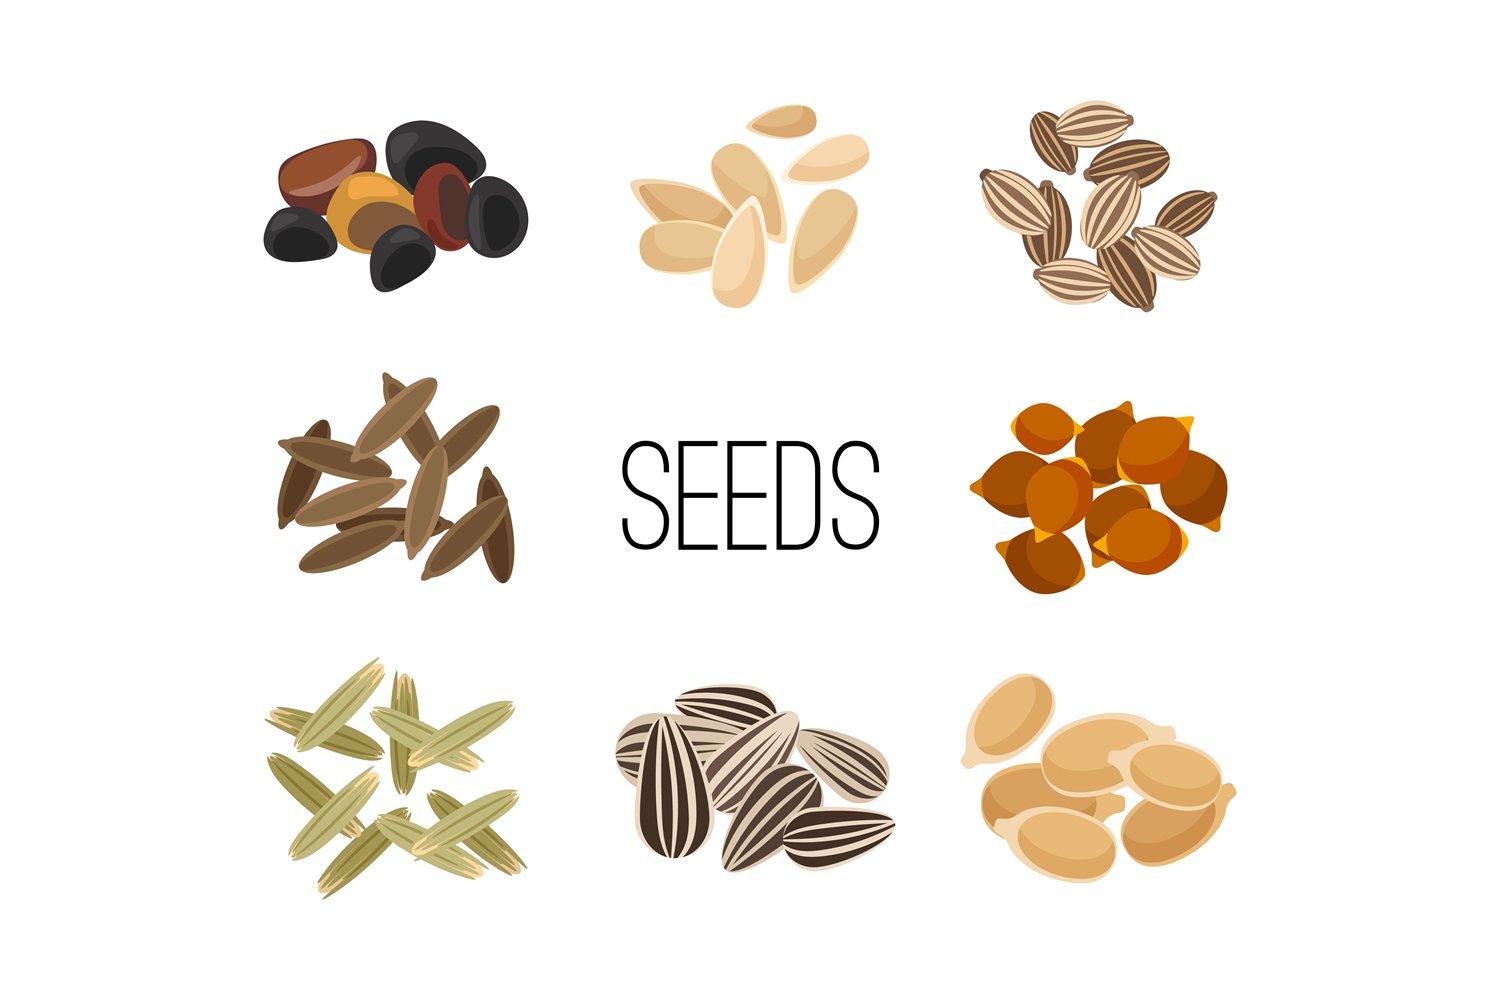 Diverse of seeds in a high quality.